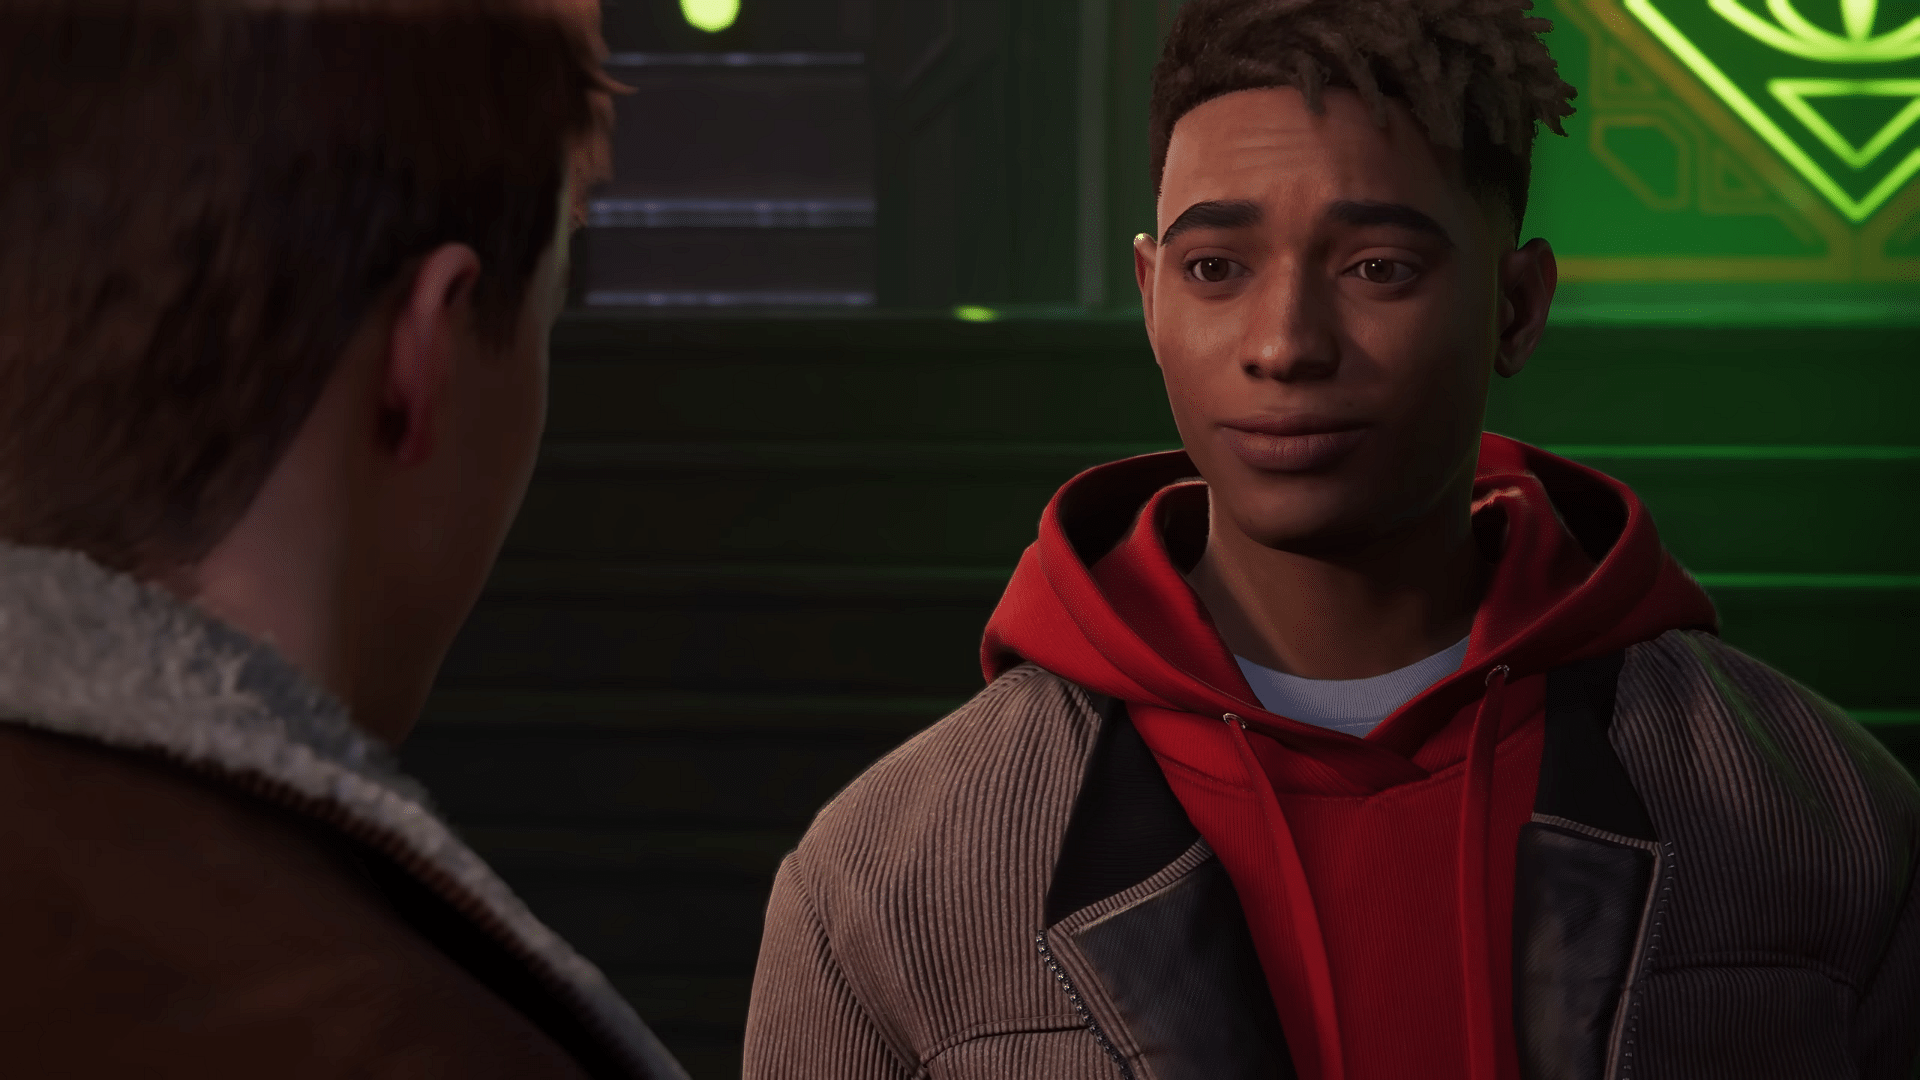 An image showing Miles Morales from Spider-Man 2 game